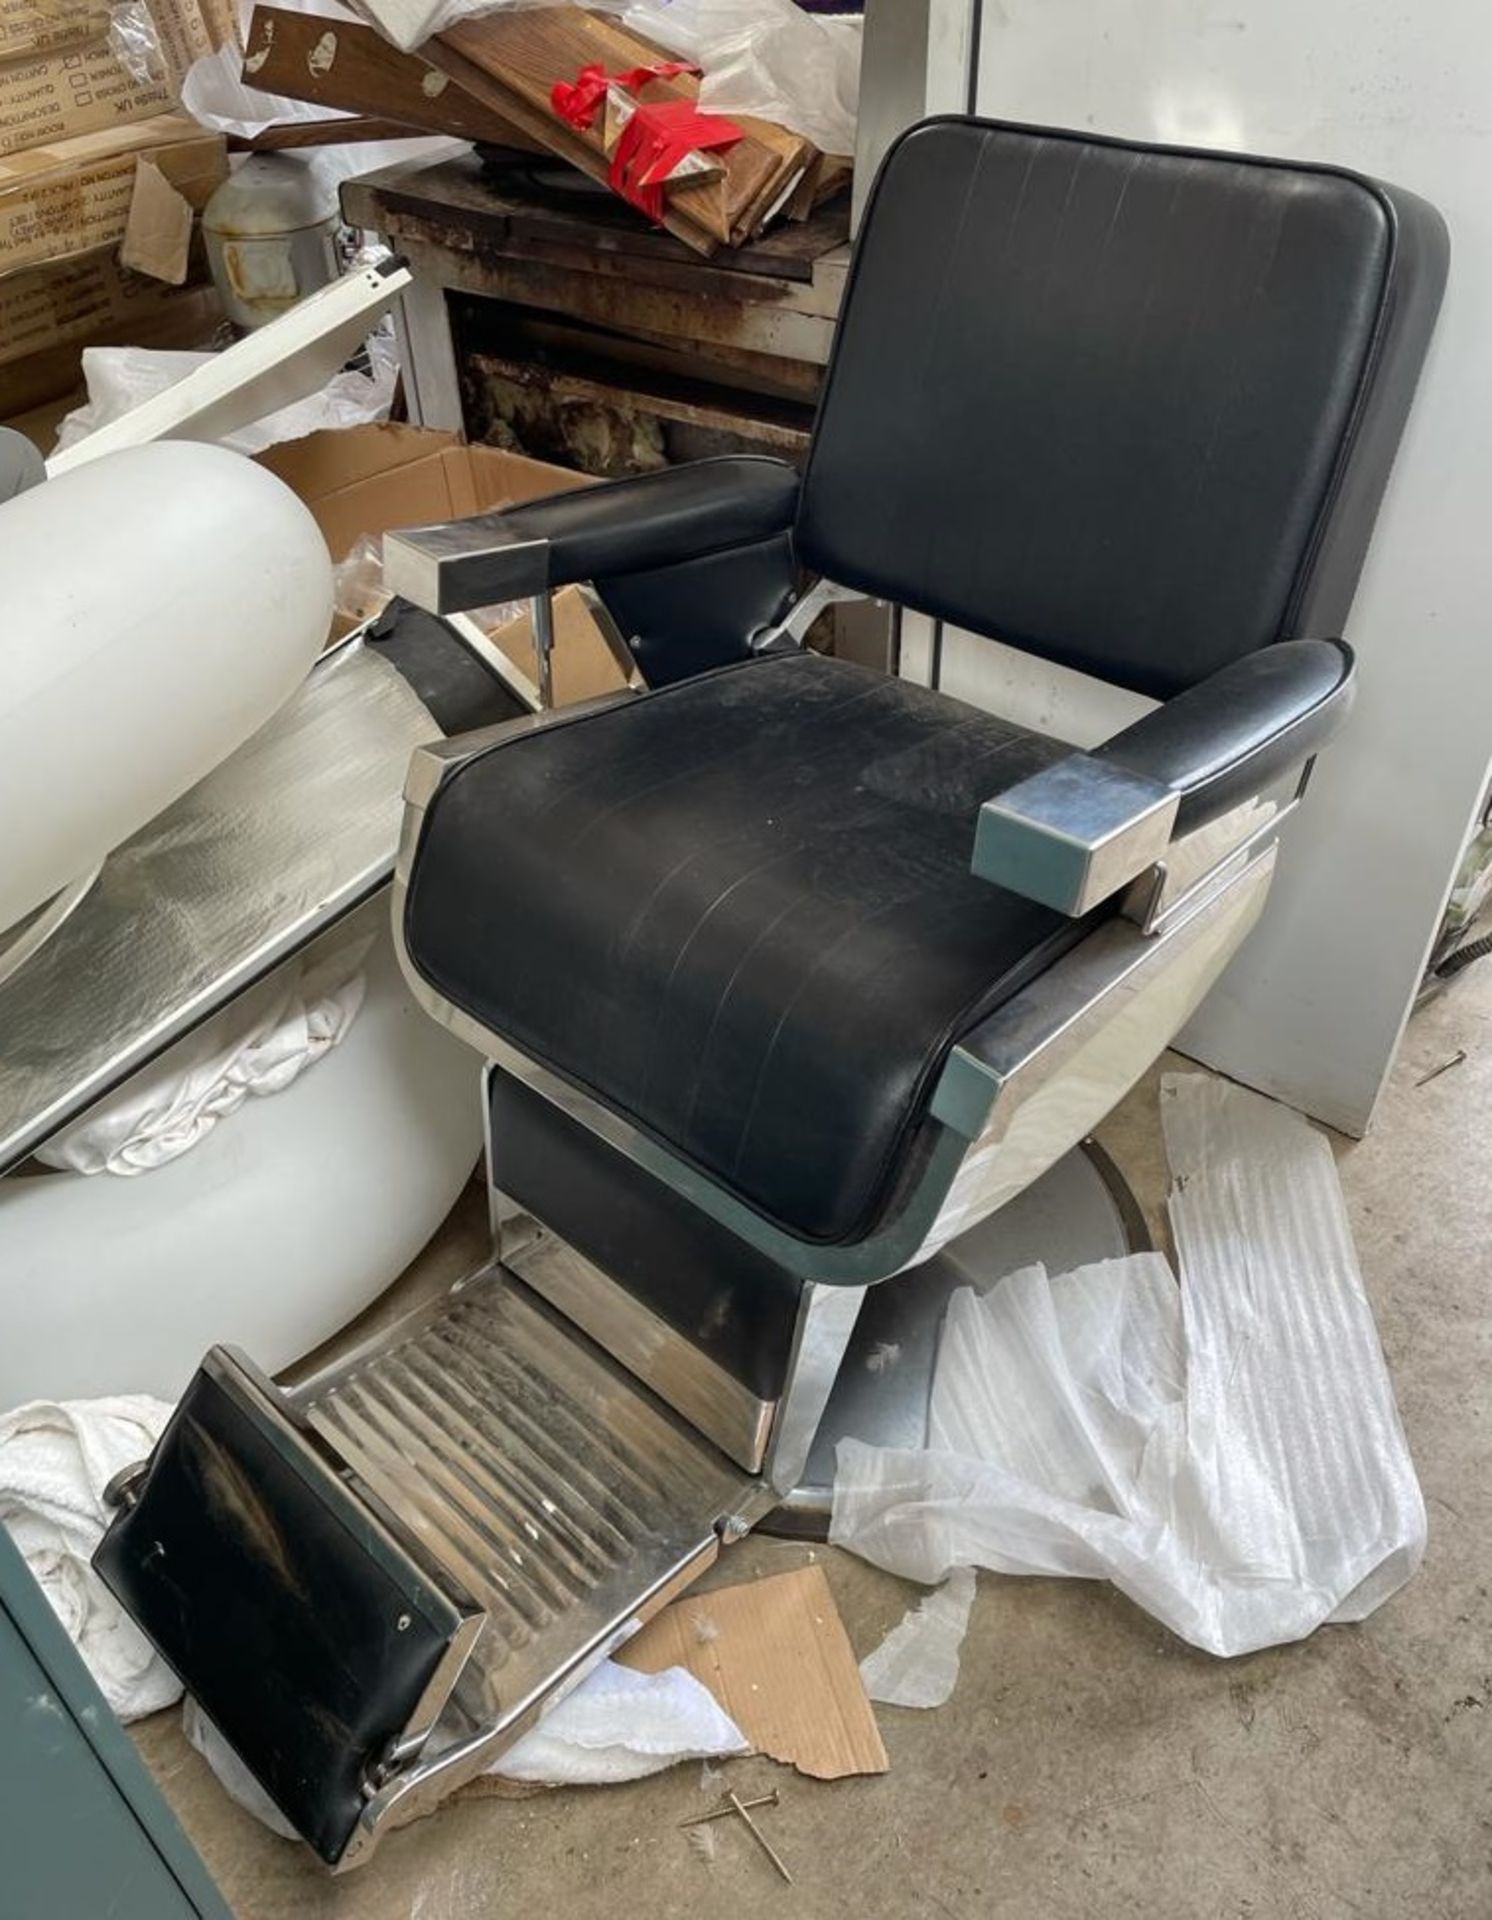 1 x Barbers Chair With Foot Rest - Head Rest Not Included - CL667 - Location: Brighton, Sussex,